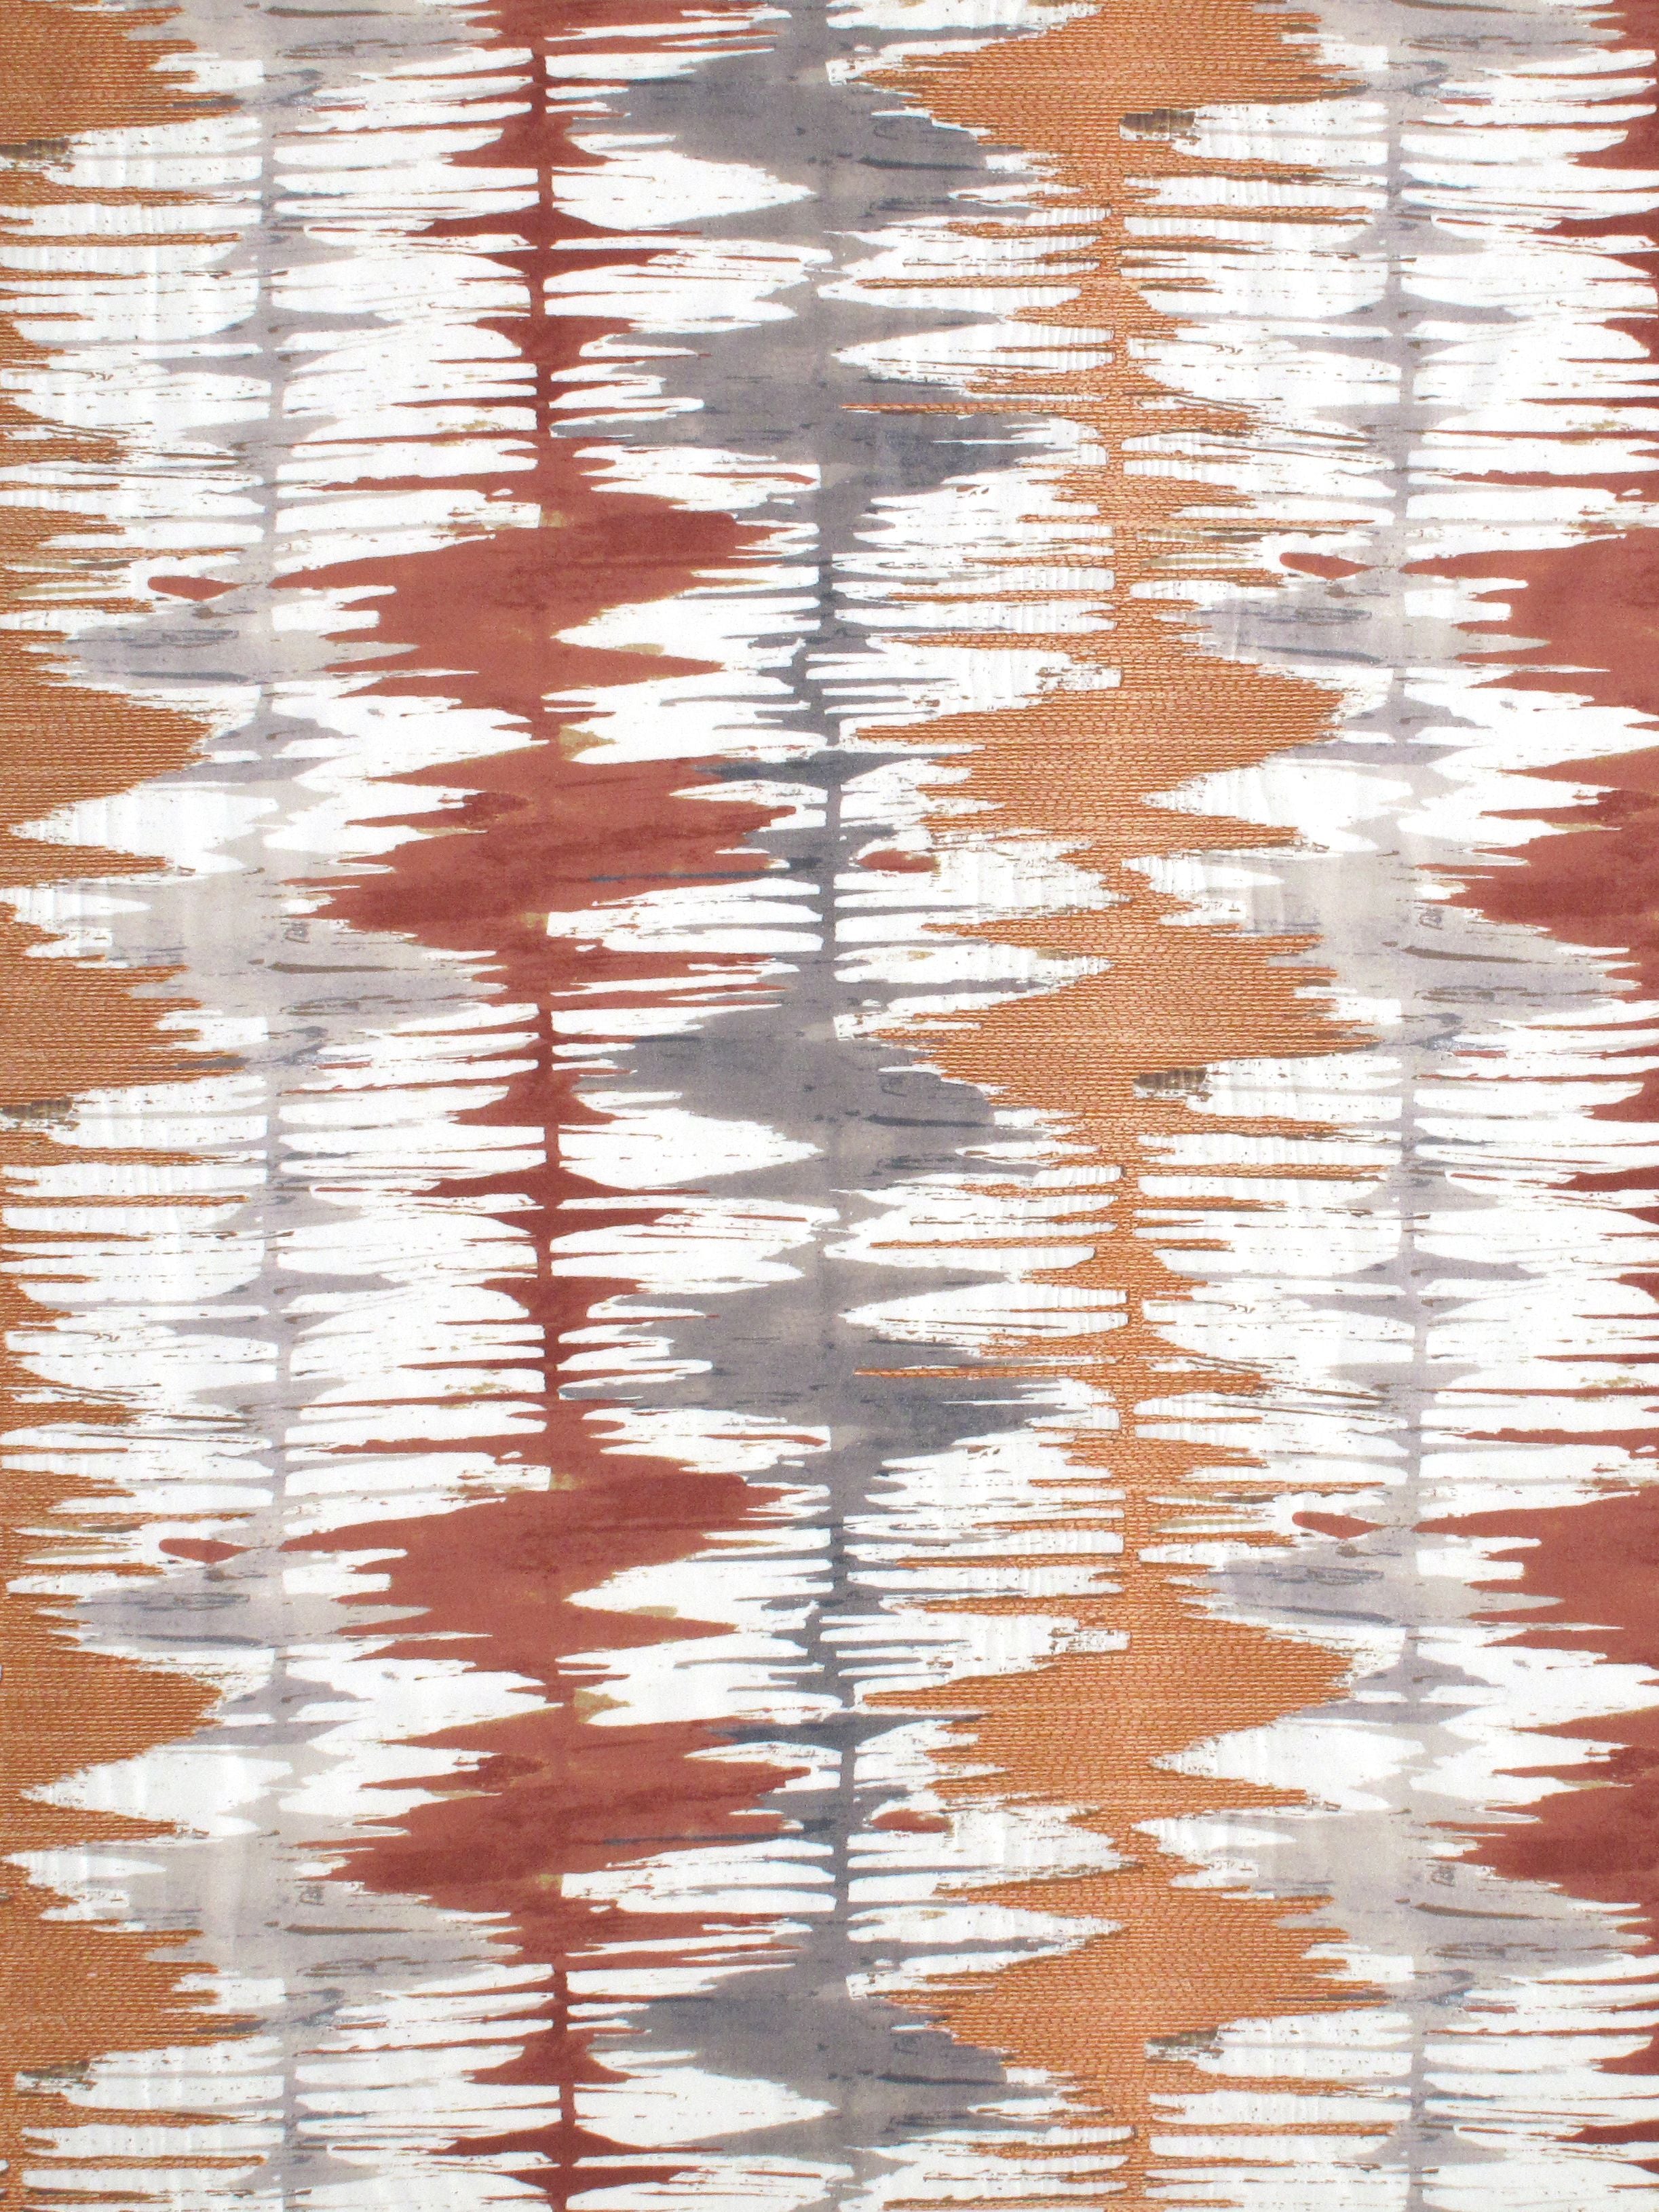 River Delta fabric in sienna color - pattern number JM 00041763 - by Scalamandre in the Old World Weavers collection